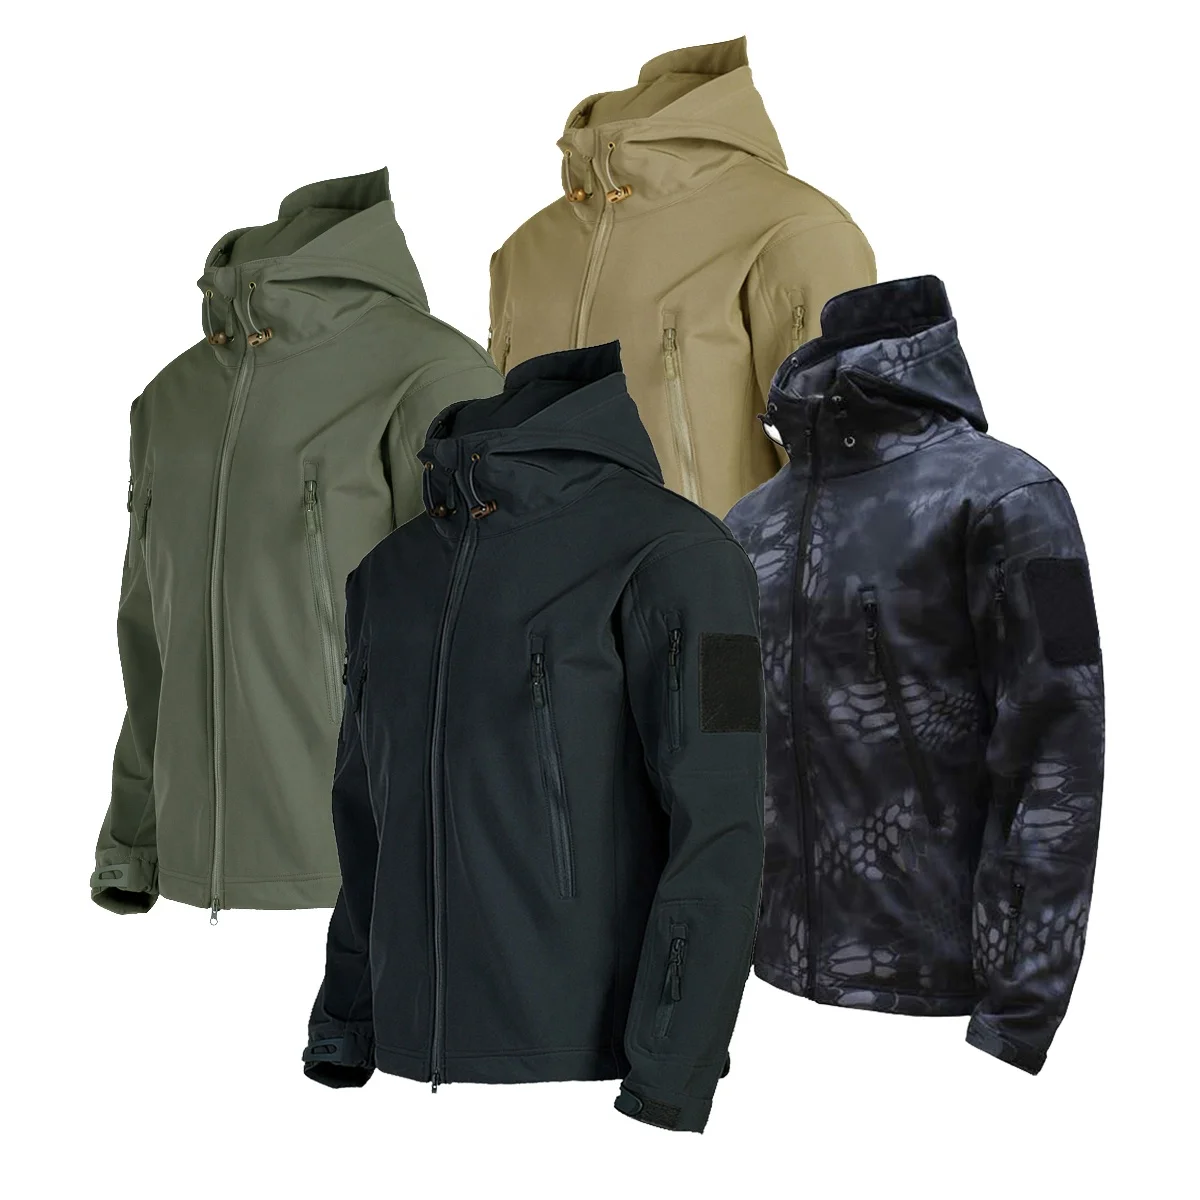 

Men's Army Fans Military Tactical Jacket Camouflage Waterproof Combat Jacket Hoody Softshell Coat Army Uniform